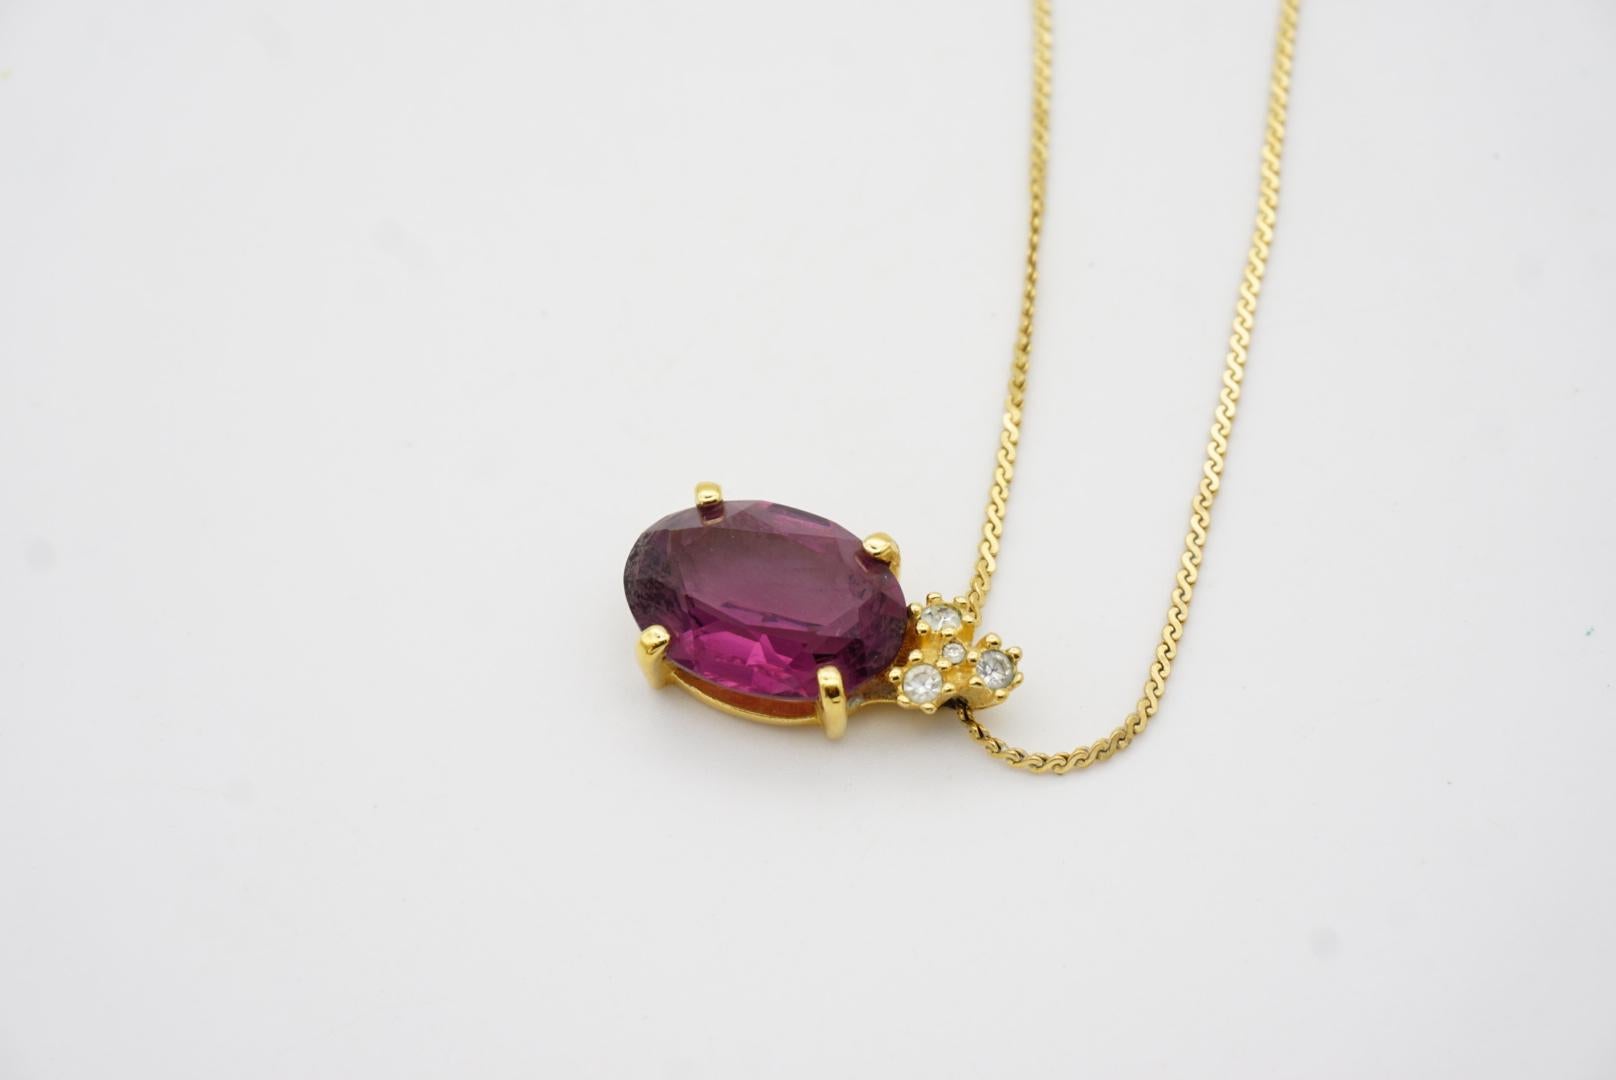 Christian Dior Vintage 1980s Amethyst Purple Oval Crystals Gold Pendant Necklace For Sale 7